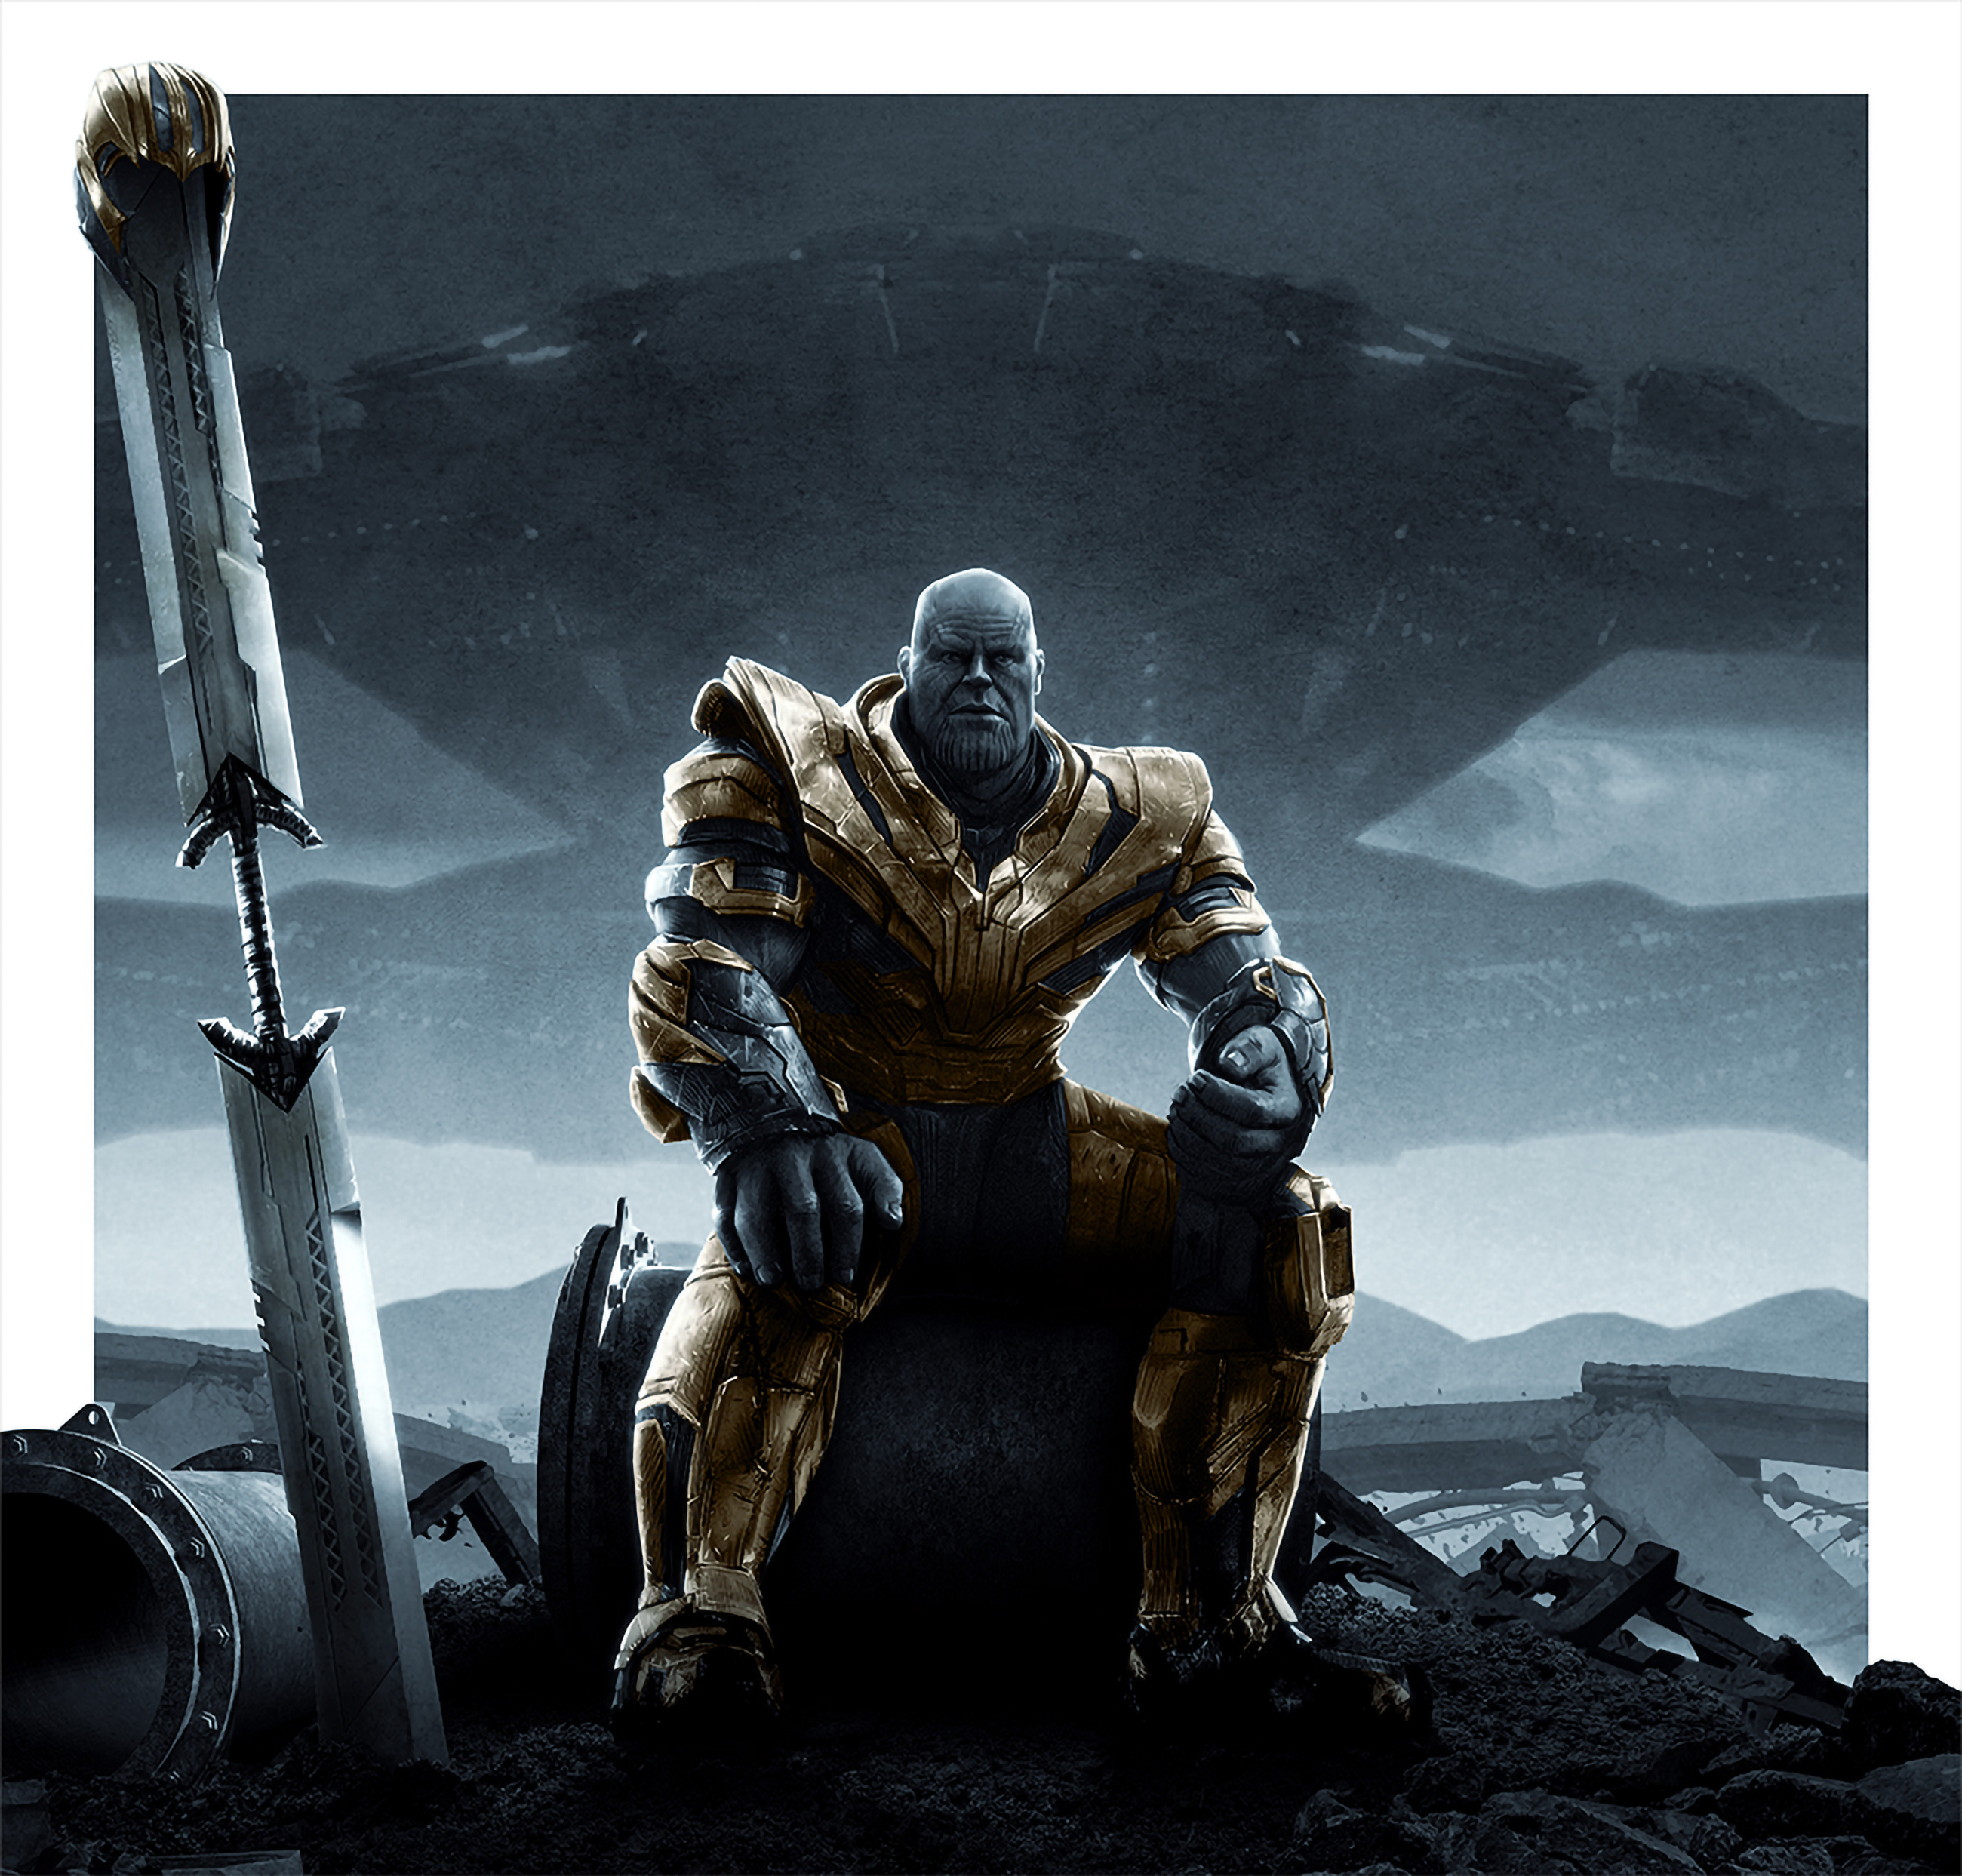 3840x21602021 Thanos Sitting In Avengers Endgame 3840x21602021 Resolution  Wallpaper, HD Movies 4K Wallpapers, Images, Photos and Background -  Wallpapers Den